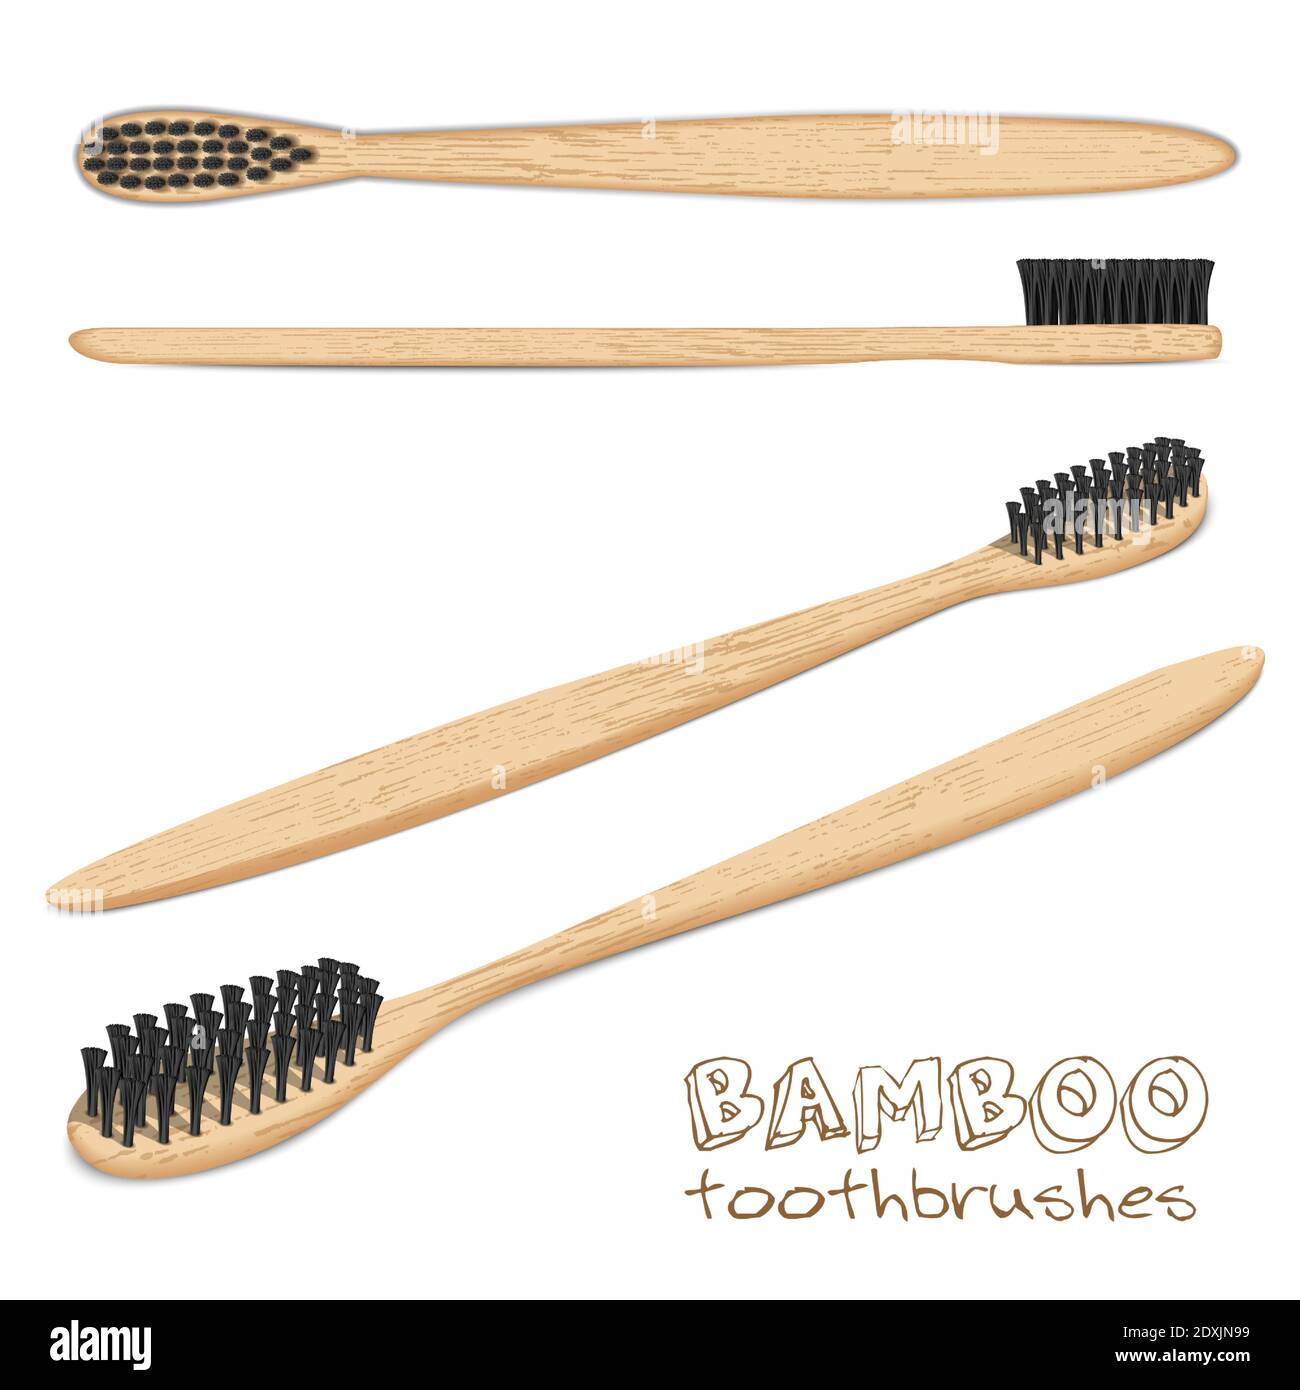 Bamboo toothbrushes. Carbon brush set, black bristles. Charcoal. Biodegradable material. Eco-friendly products. Isolated on white background. Vector i Stock Vector